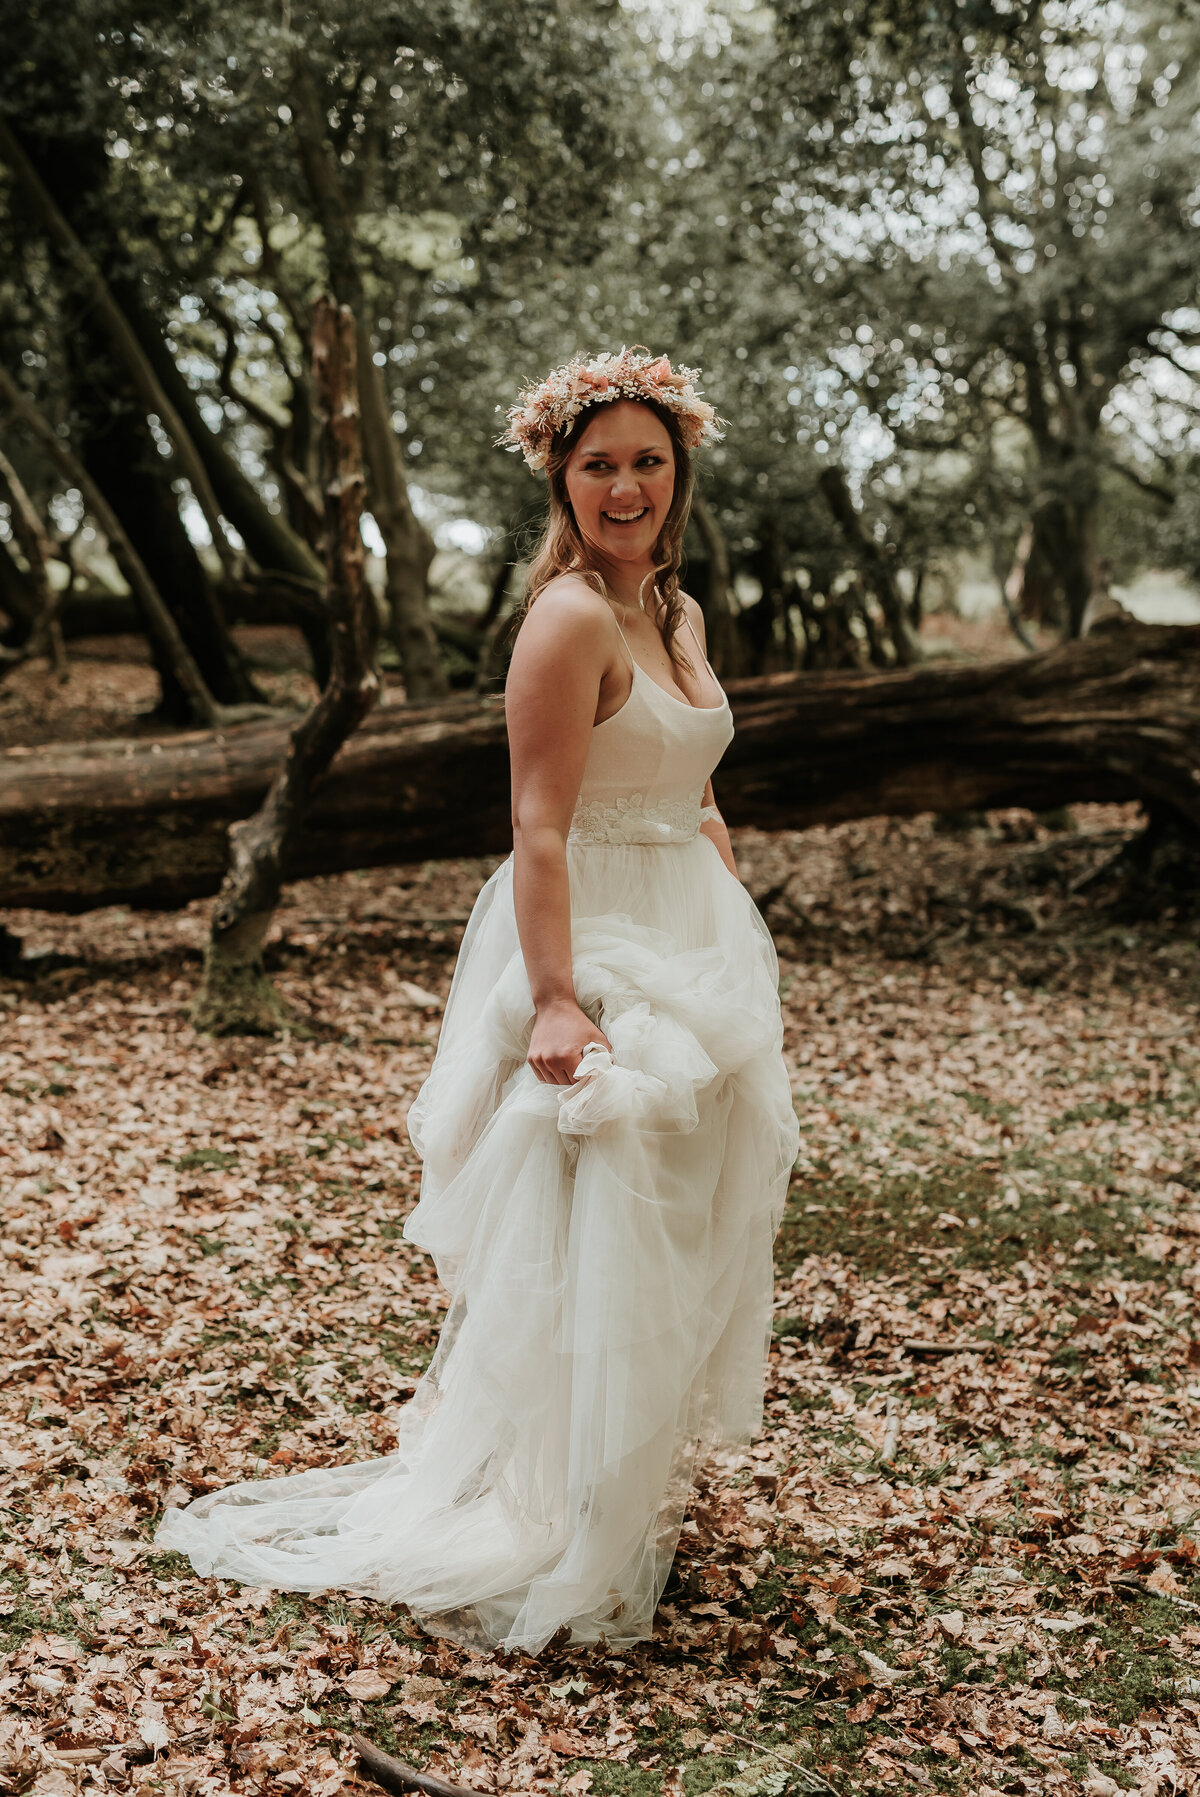 Bride wearing a dried floral crown gathers her dress as she walks through the woodlands in New Forest